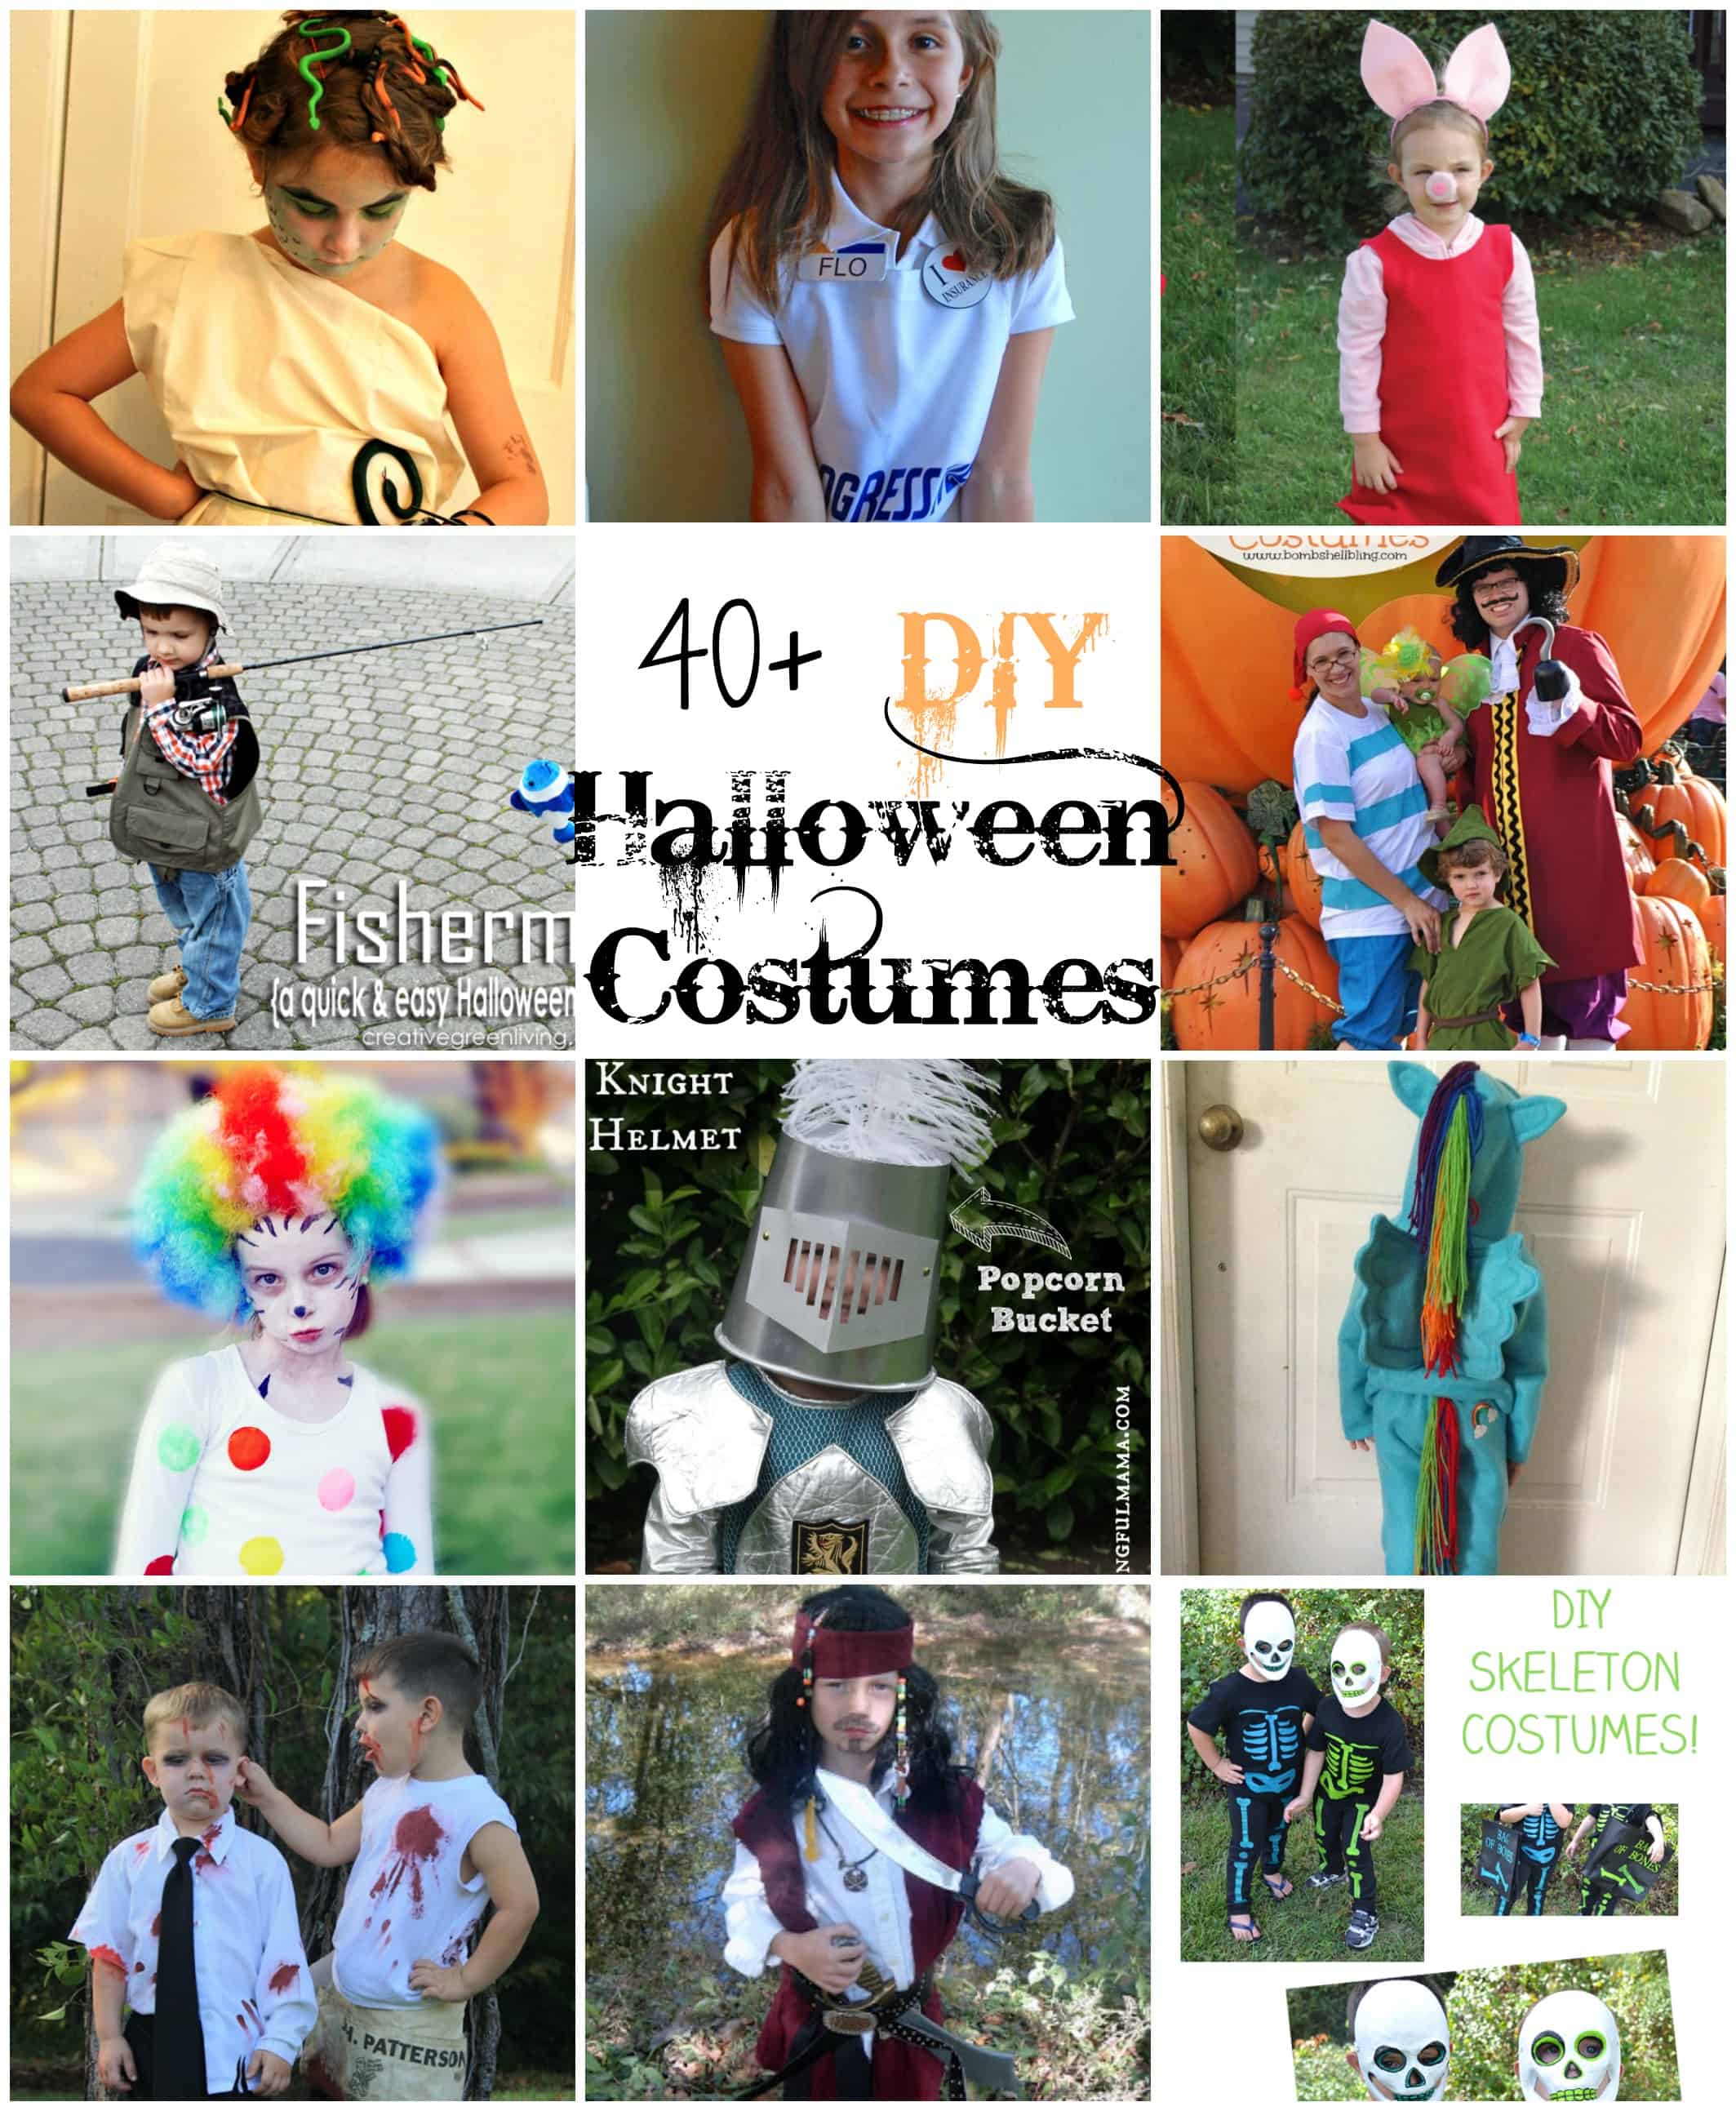 Over 40 Do It Yourself Halloween Costumes! - A Turtle's Life for Me